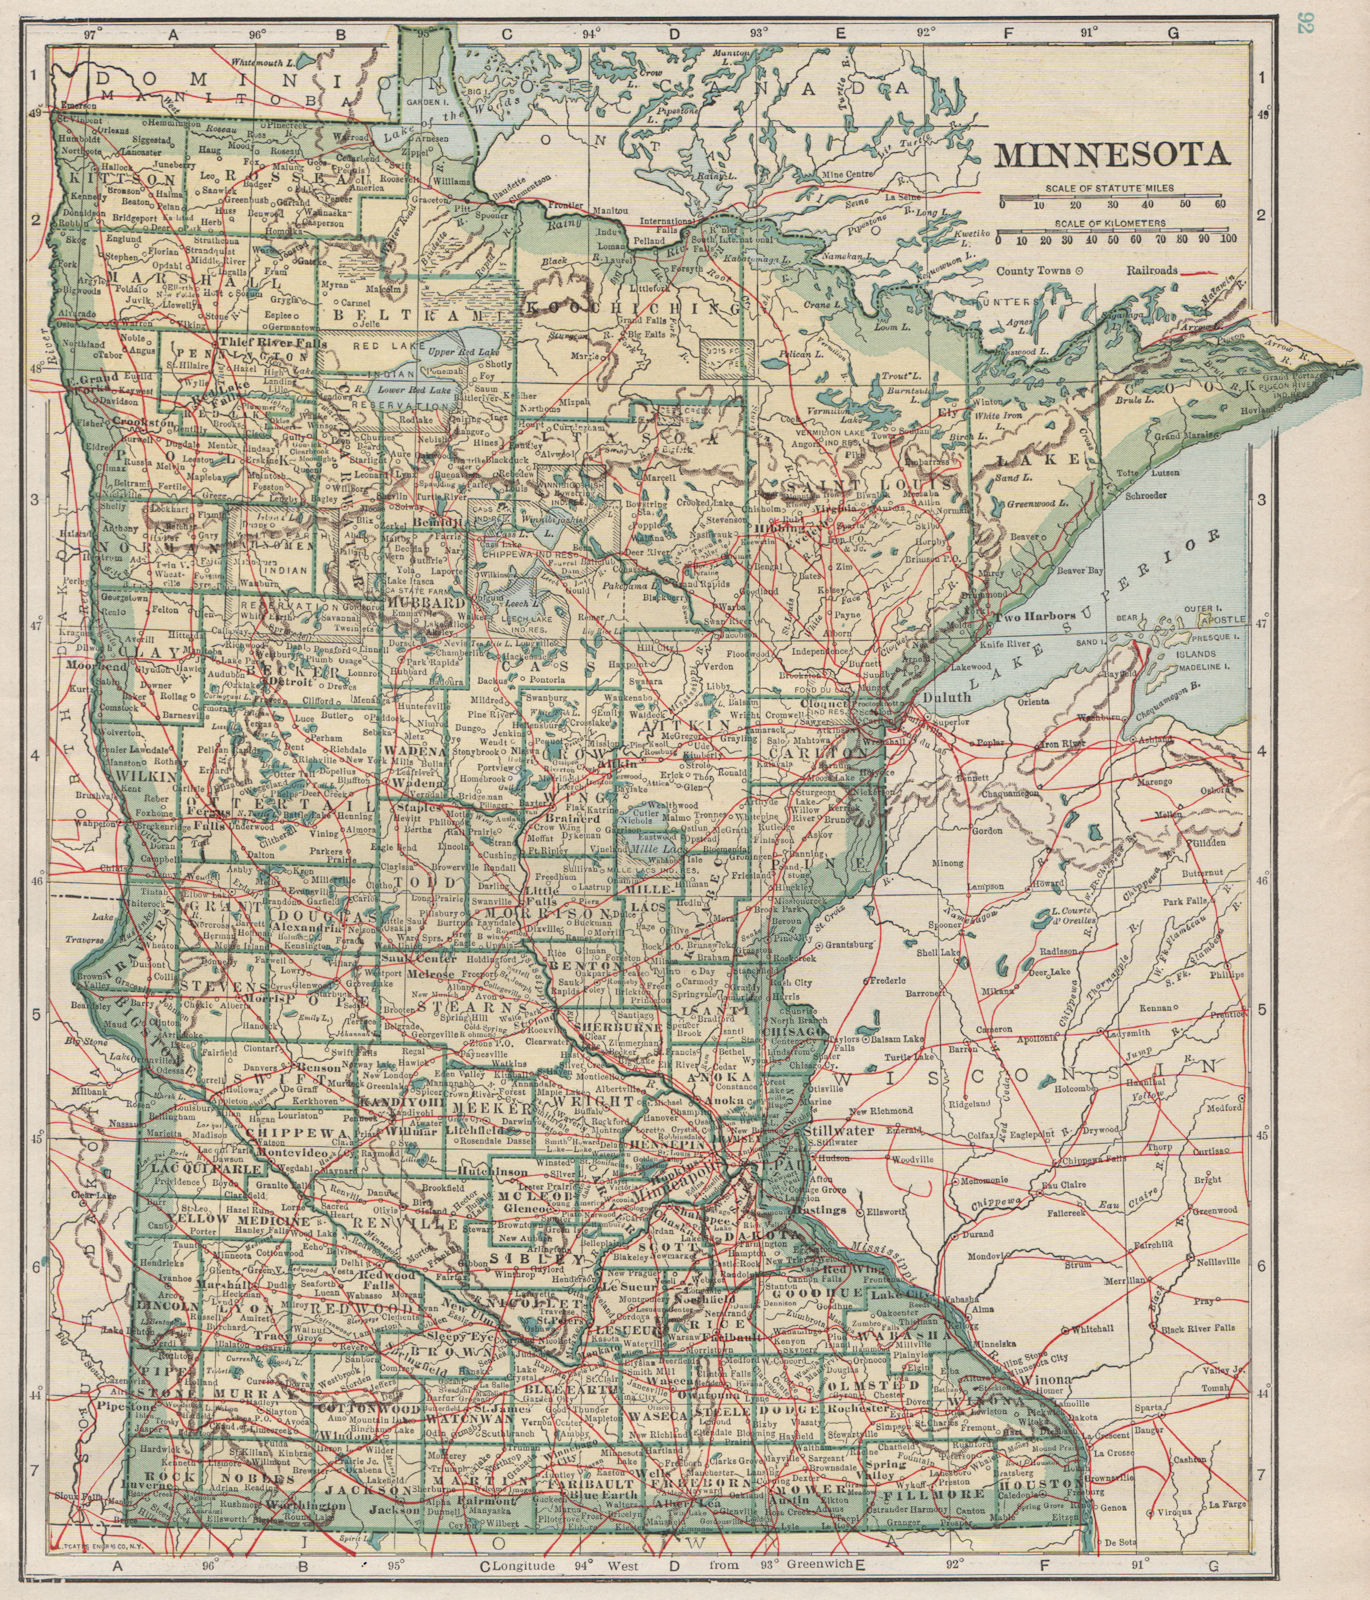 Associate Product Minnesota state map showing railroads. POATES 1925 old vintage plan chart